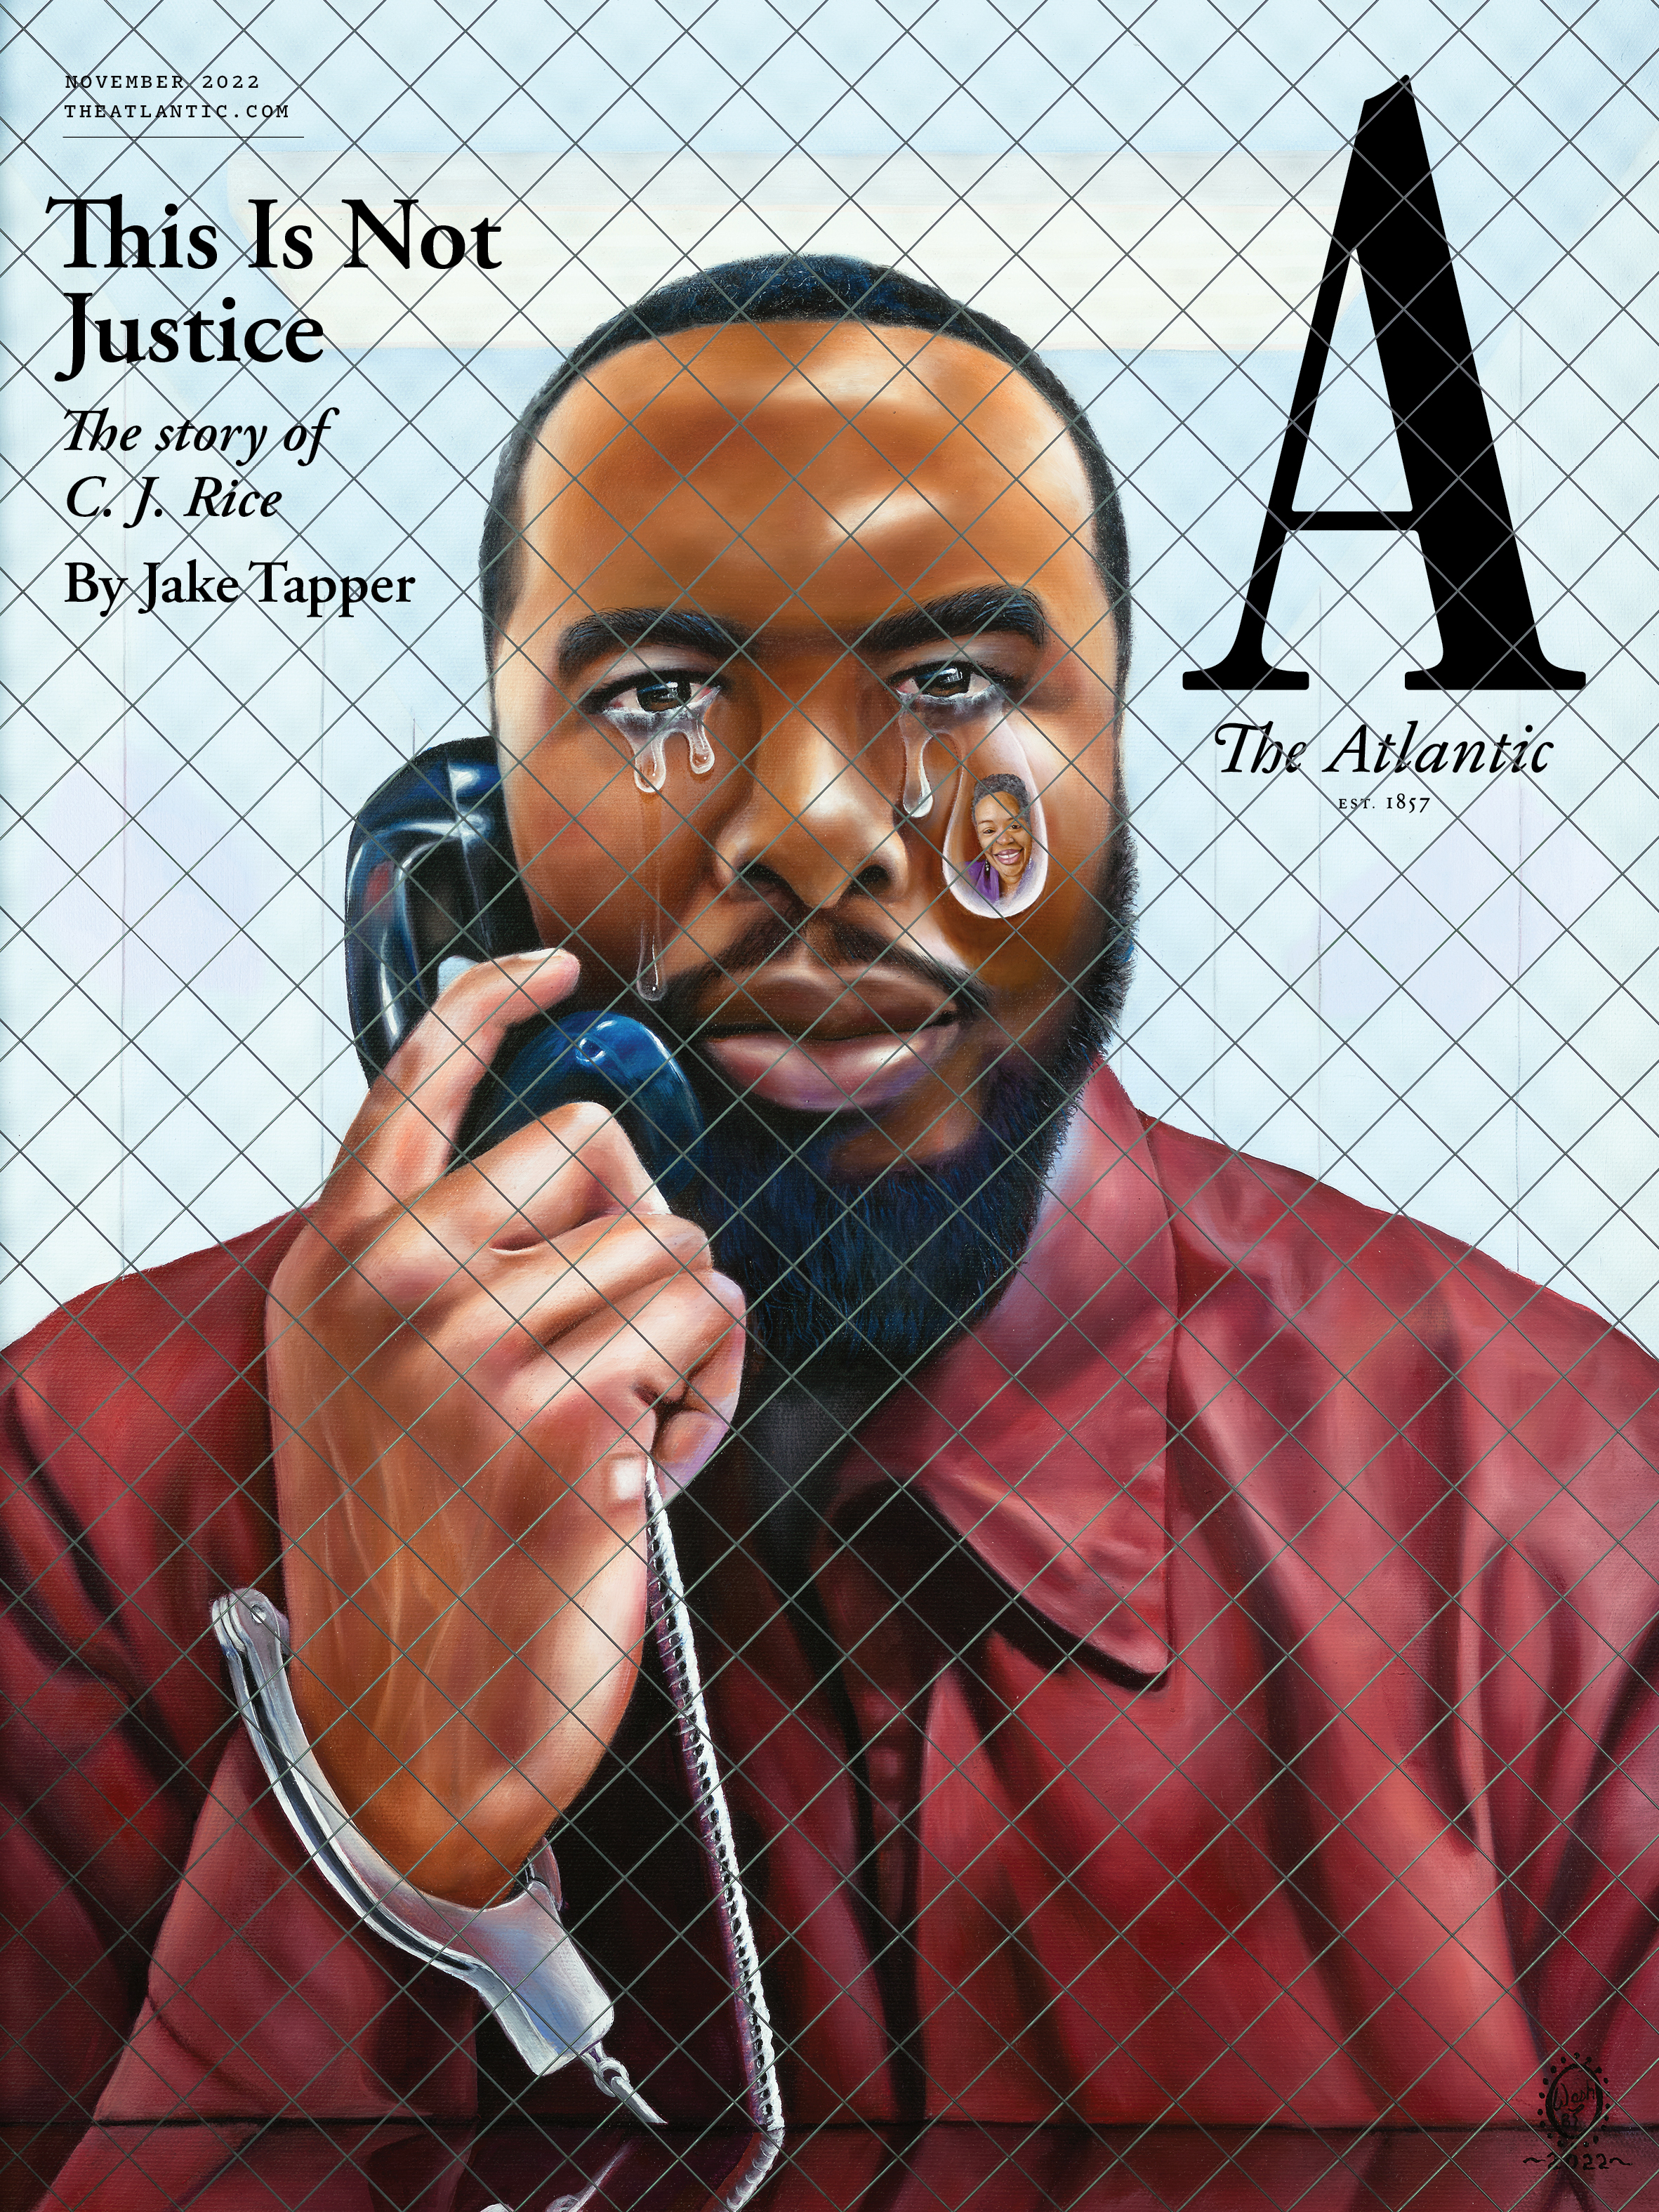 The Atlantic “This Is Not Justice” November 2022